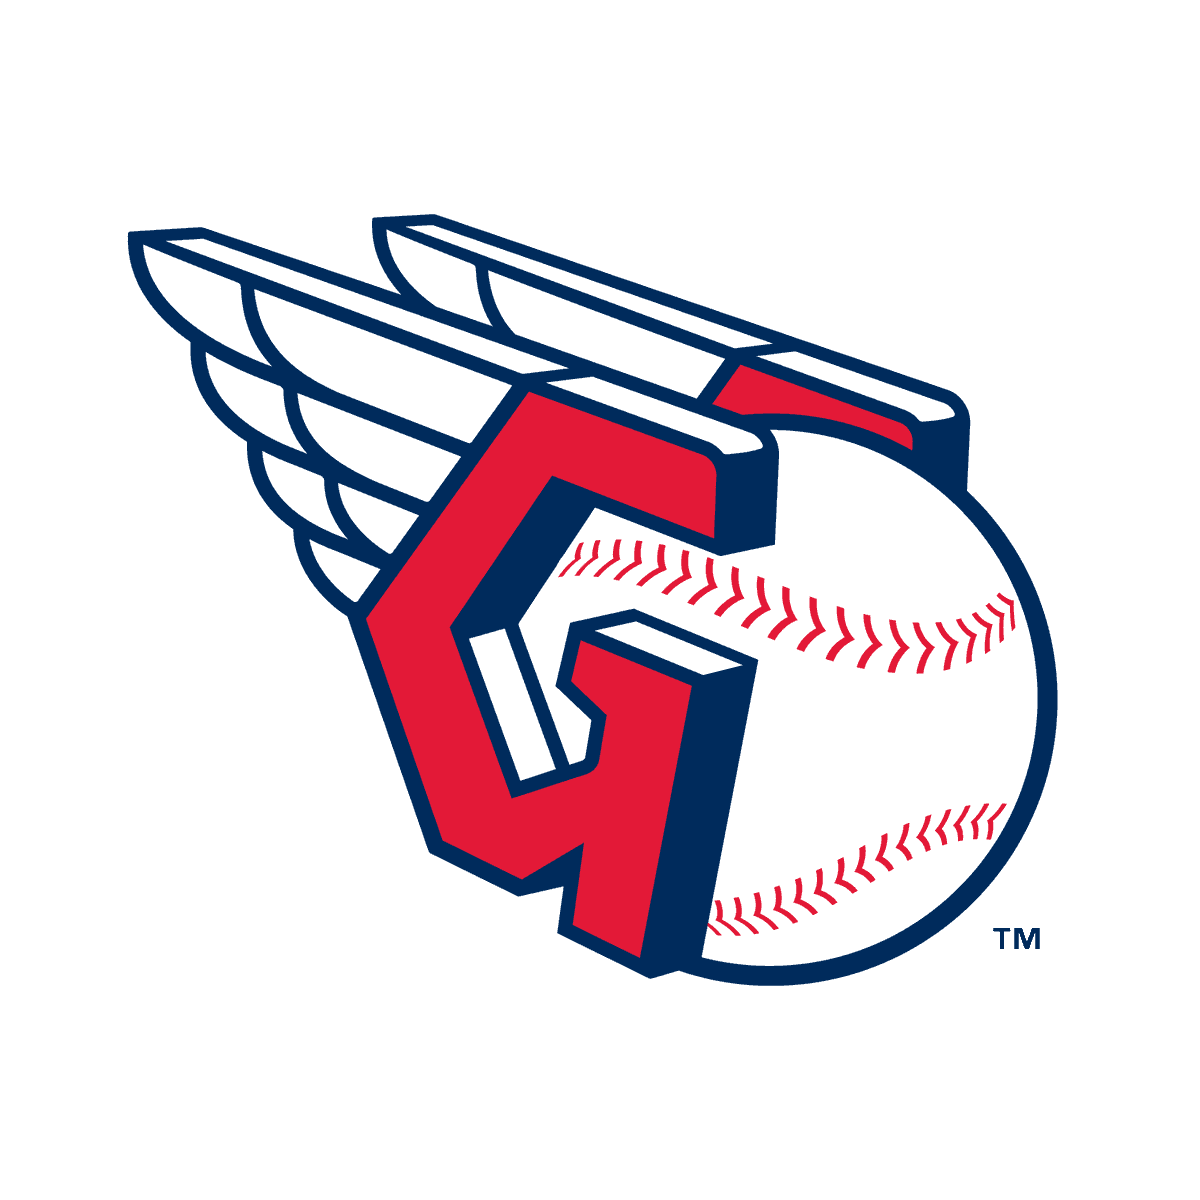 Tune in to WLEC today for another game between the Boston Orioles and the Cleveland Guardians! Airtime begins at 5:35pm and the game starts at 6:10pm. https://t.co/2RJdc2FlyM